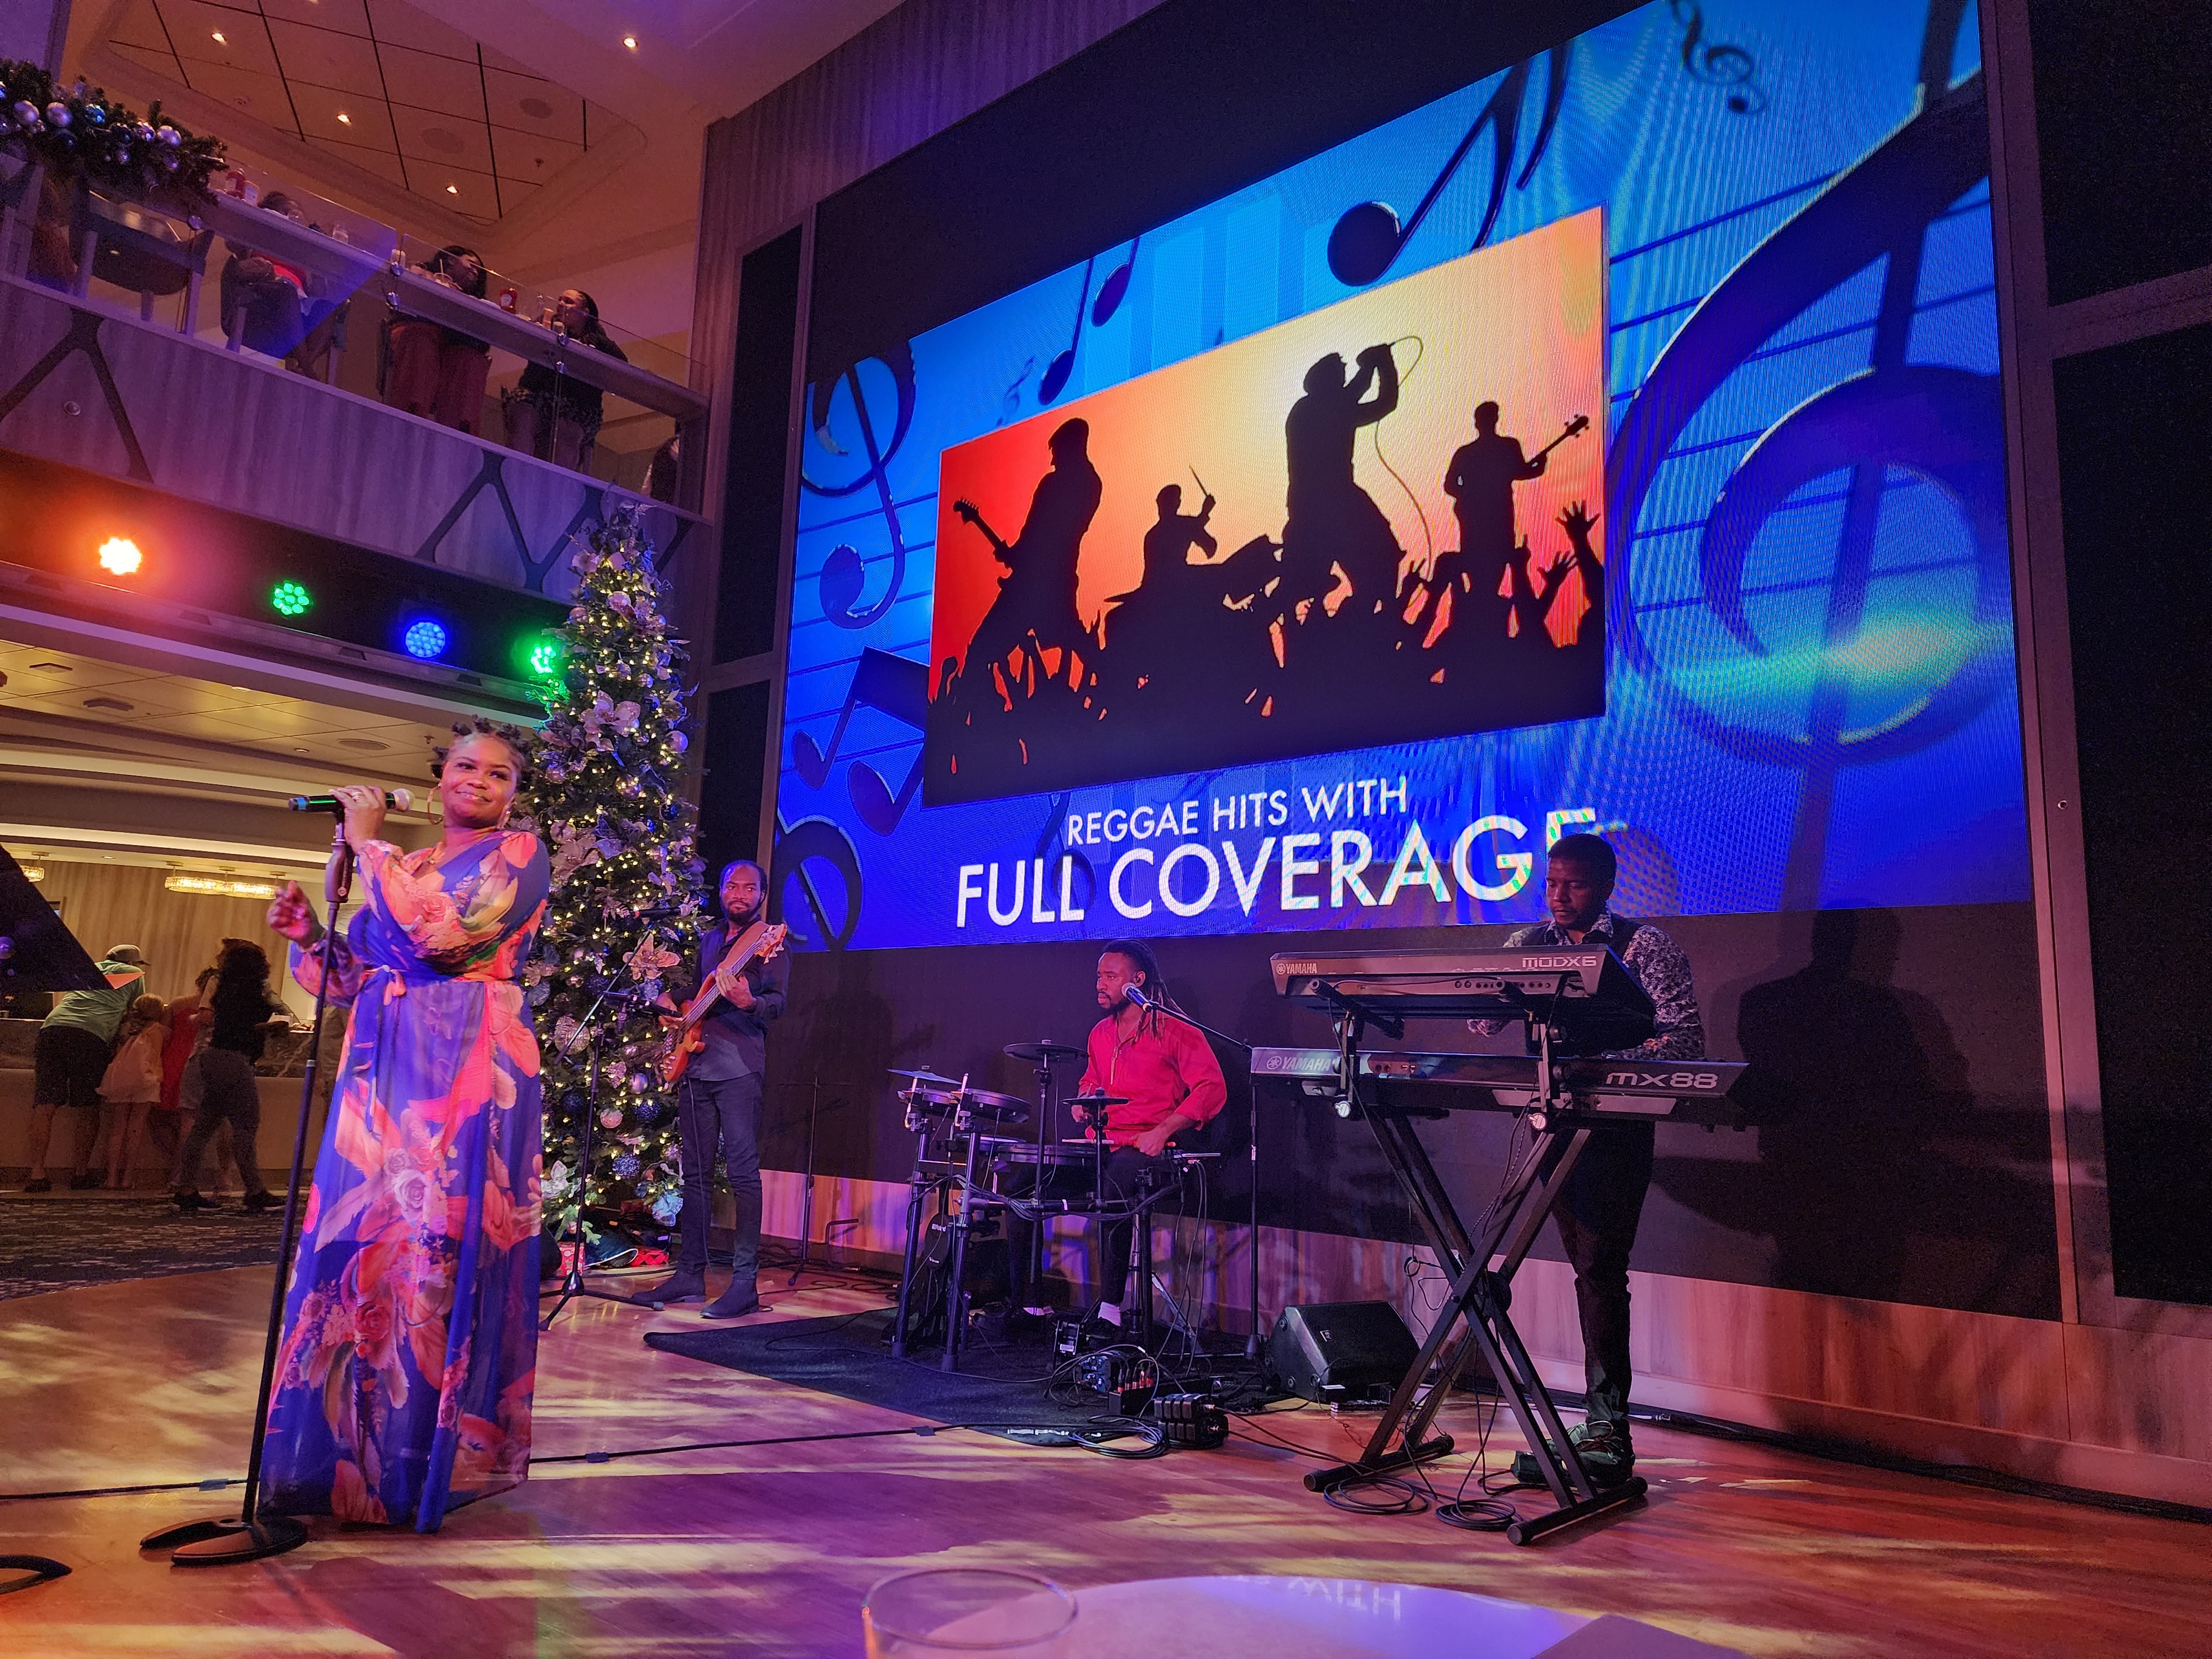 Reggae band performing on a cruise ship indoors